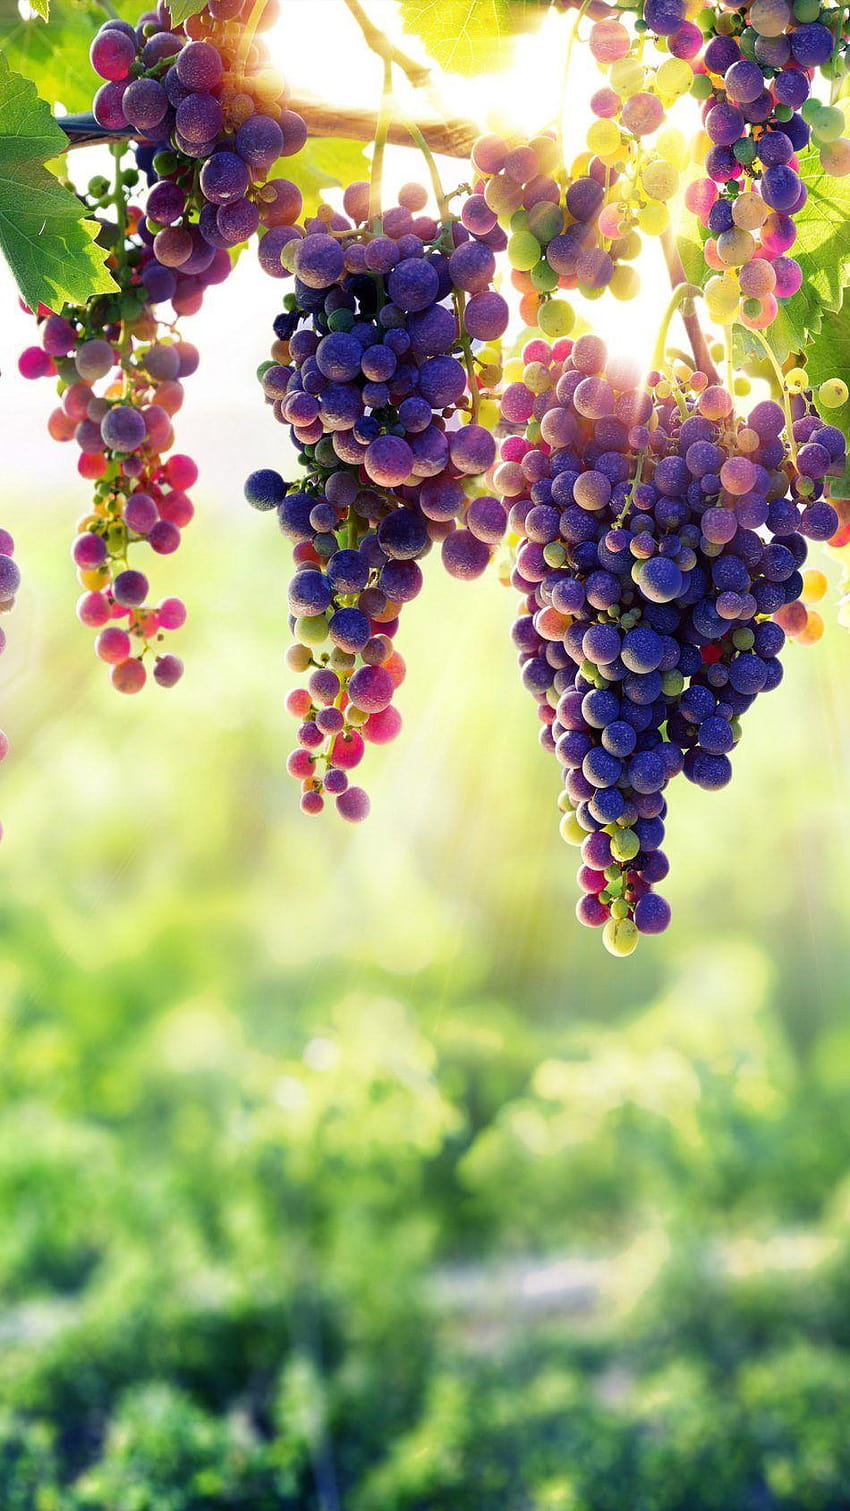 Grapes Pure Ultra Mobile, android pohon buah wallpaper ponsel HD